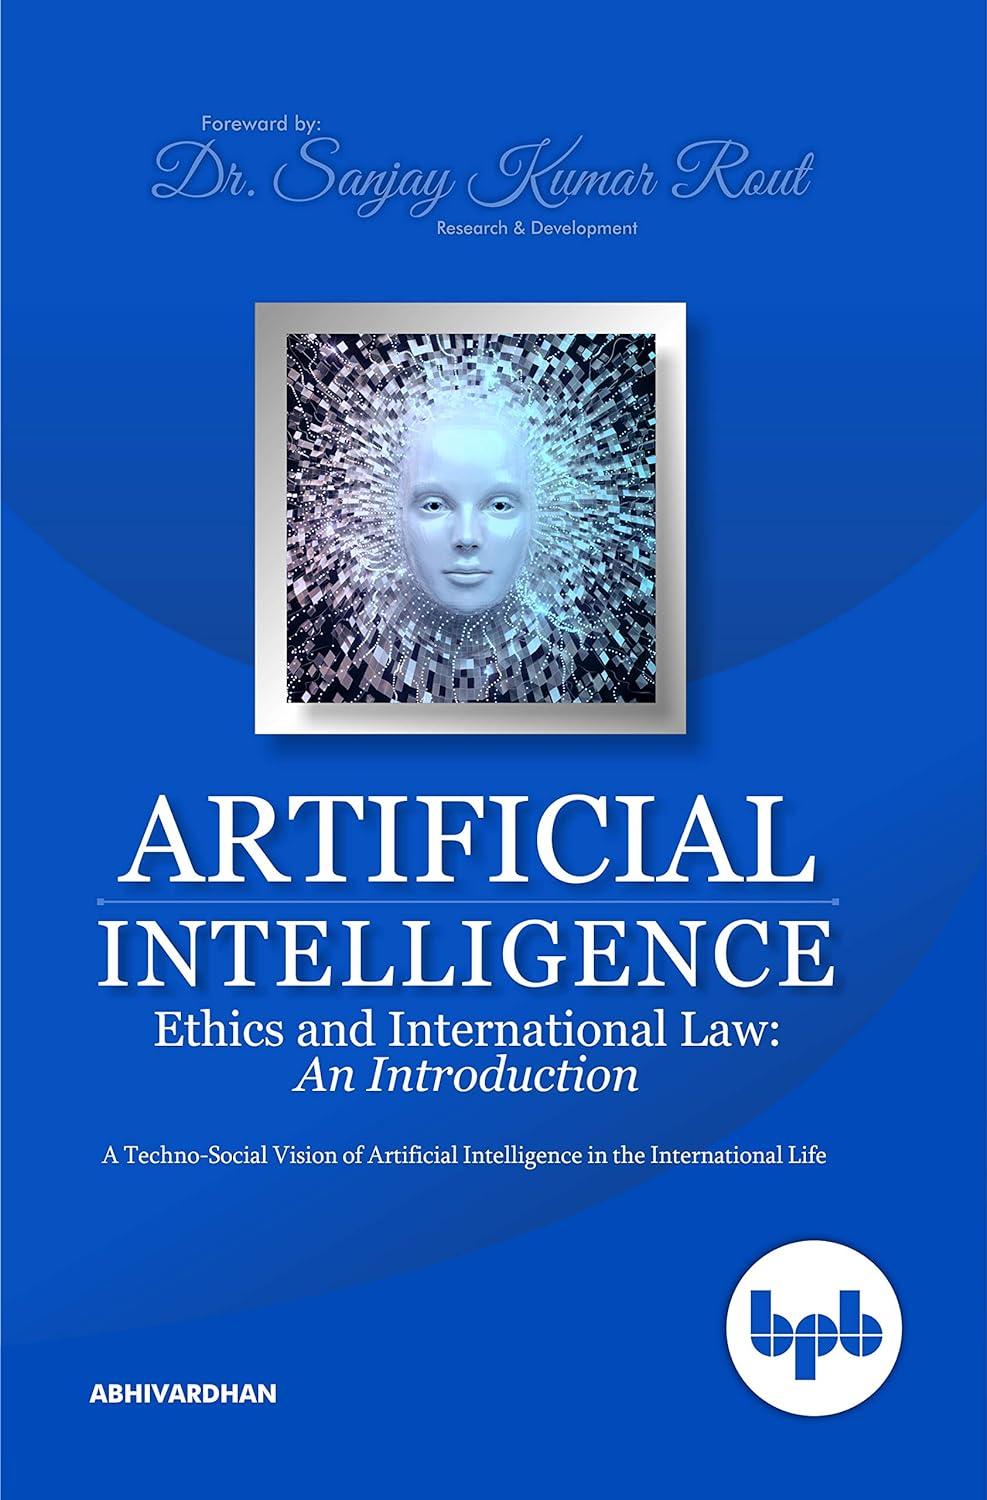 artificial intelligence ethics and international law a techno-social vision of artificial intelligence in the